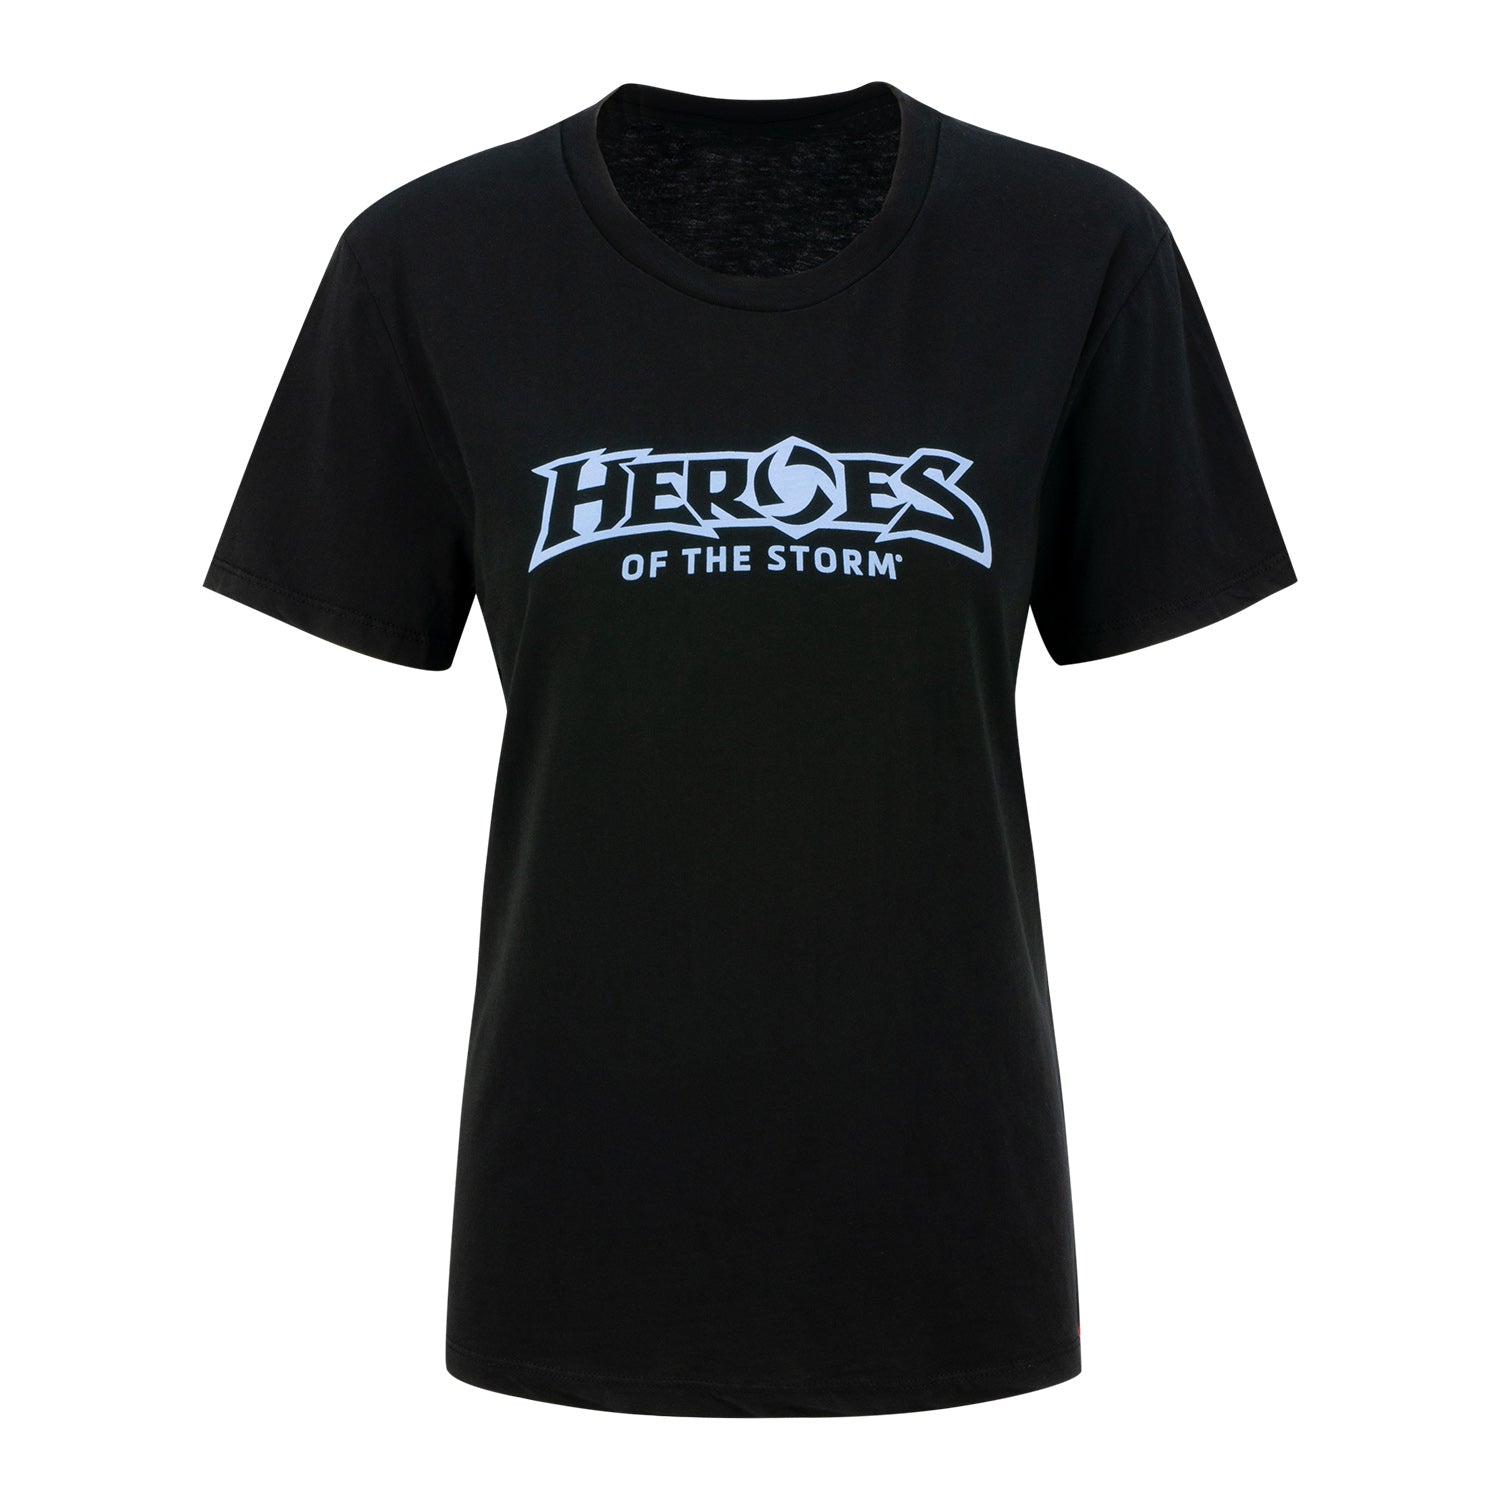 Heroes of the Storm Women's Black T-Shirt - Front View